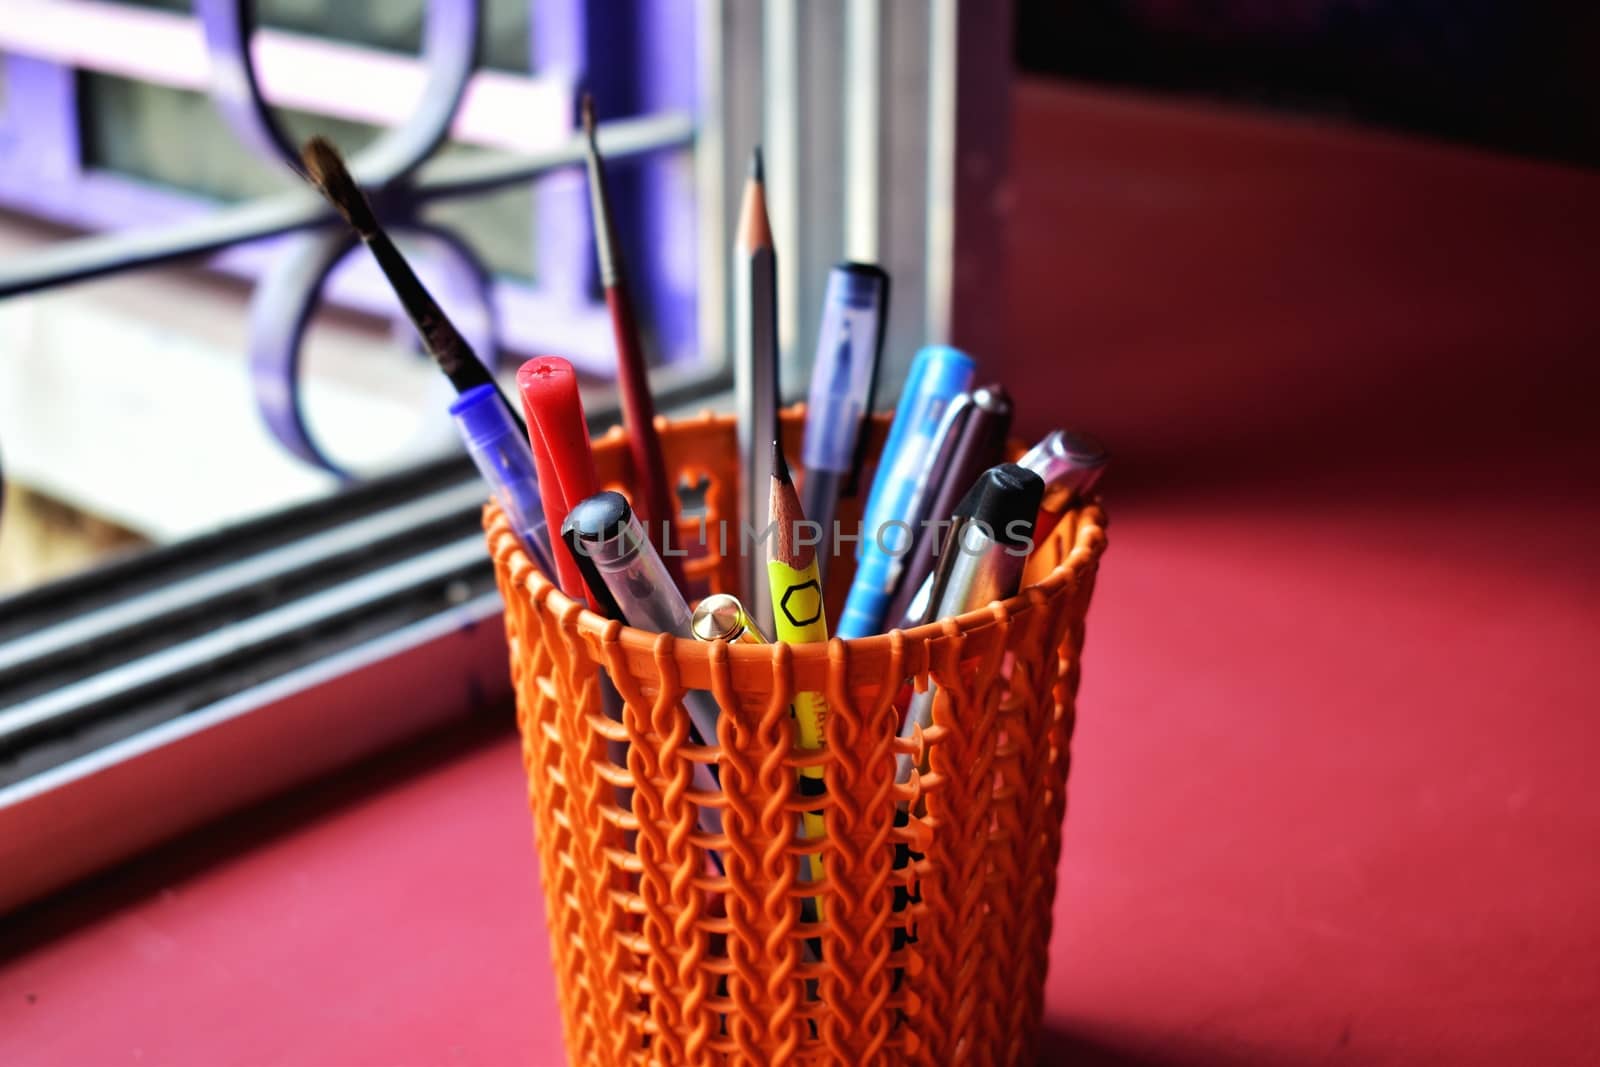 An orange colored pen case with many types of pens and pencils and some paint brush